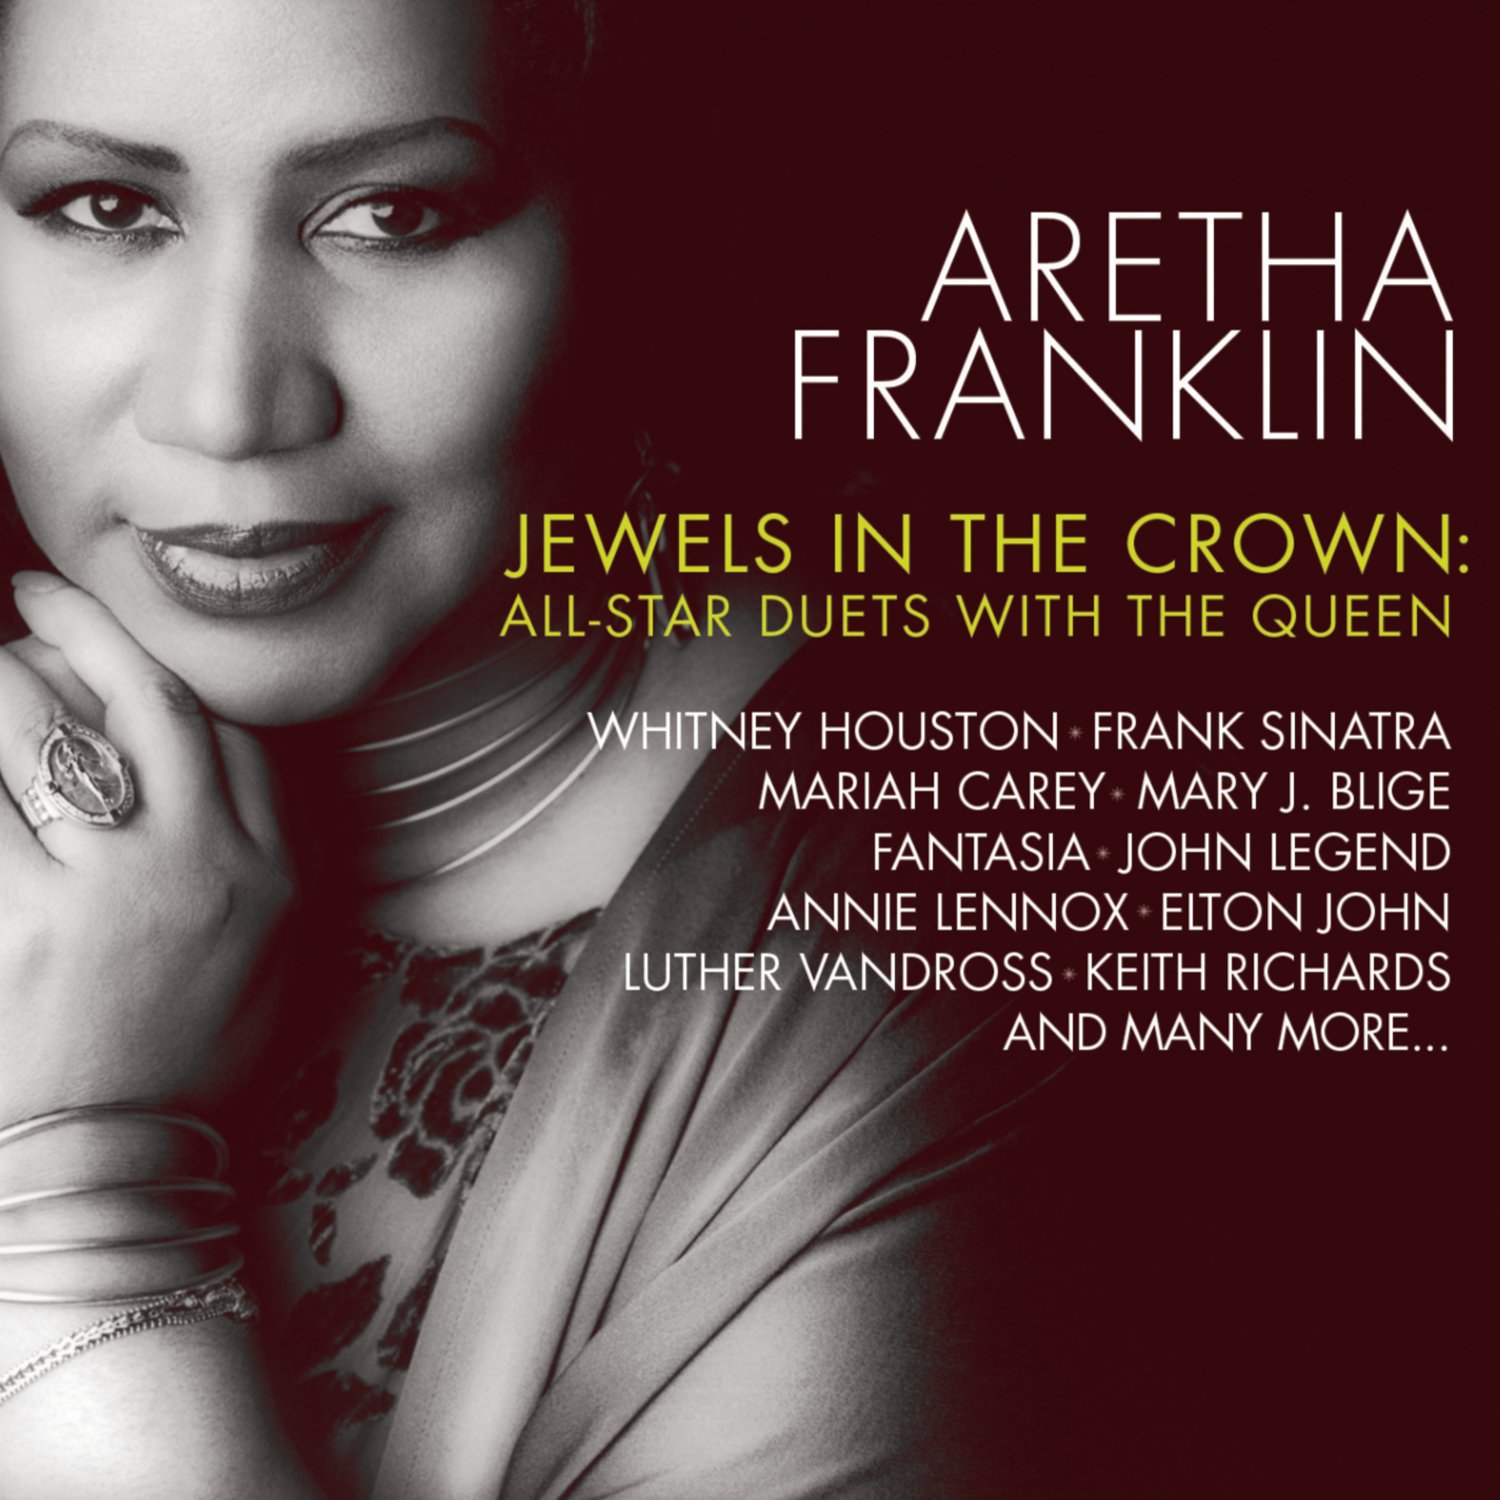 Aretha Franklin, Jewels in the Crown: All-Star Duets with the Queen, CD